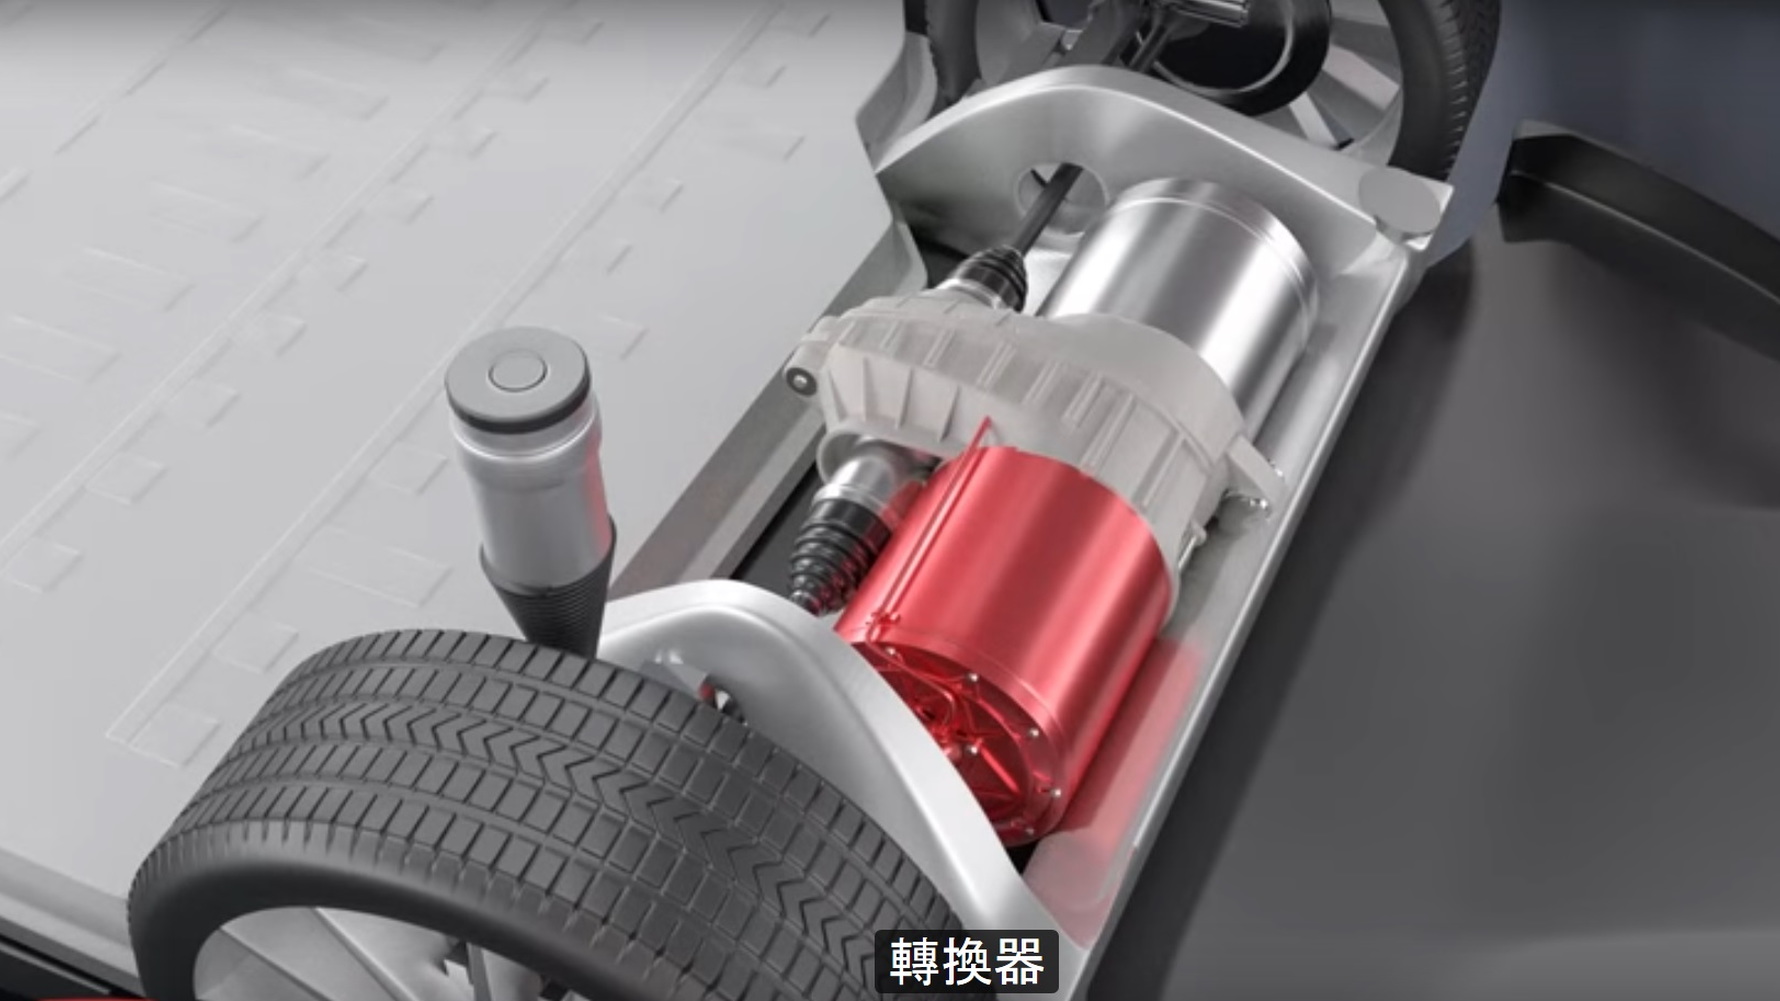 Electric motor, shown in 'How Does an Electric Car Work?' video by Learn Engineering